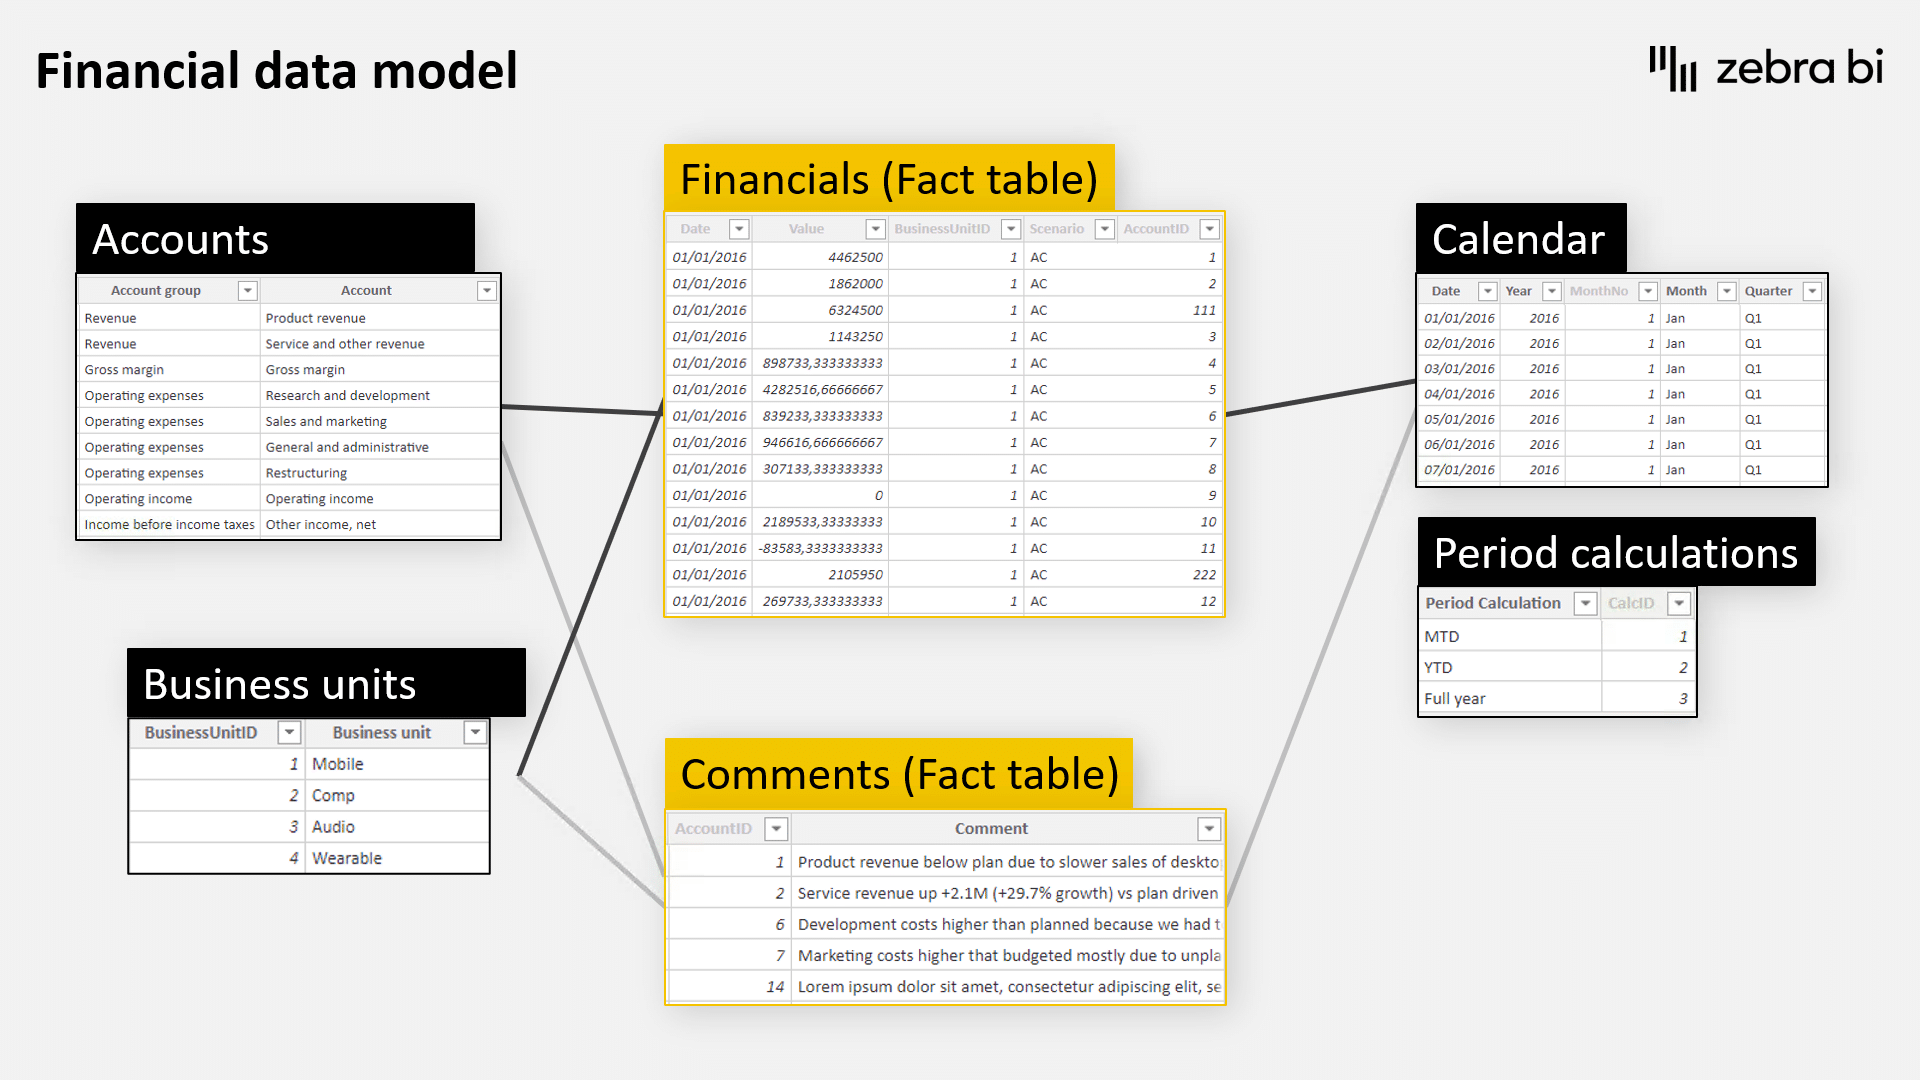 The financial data model for Power BI income statements